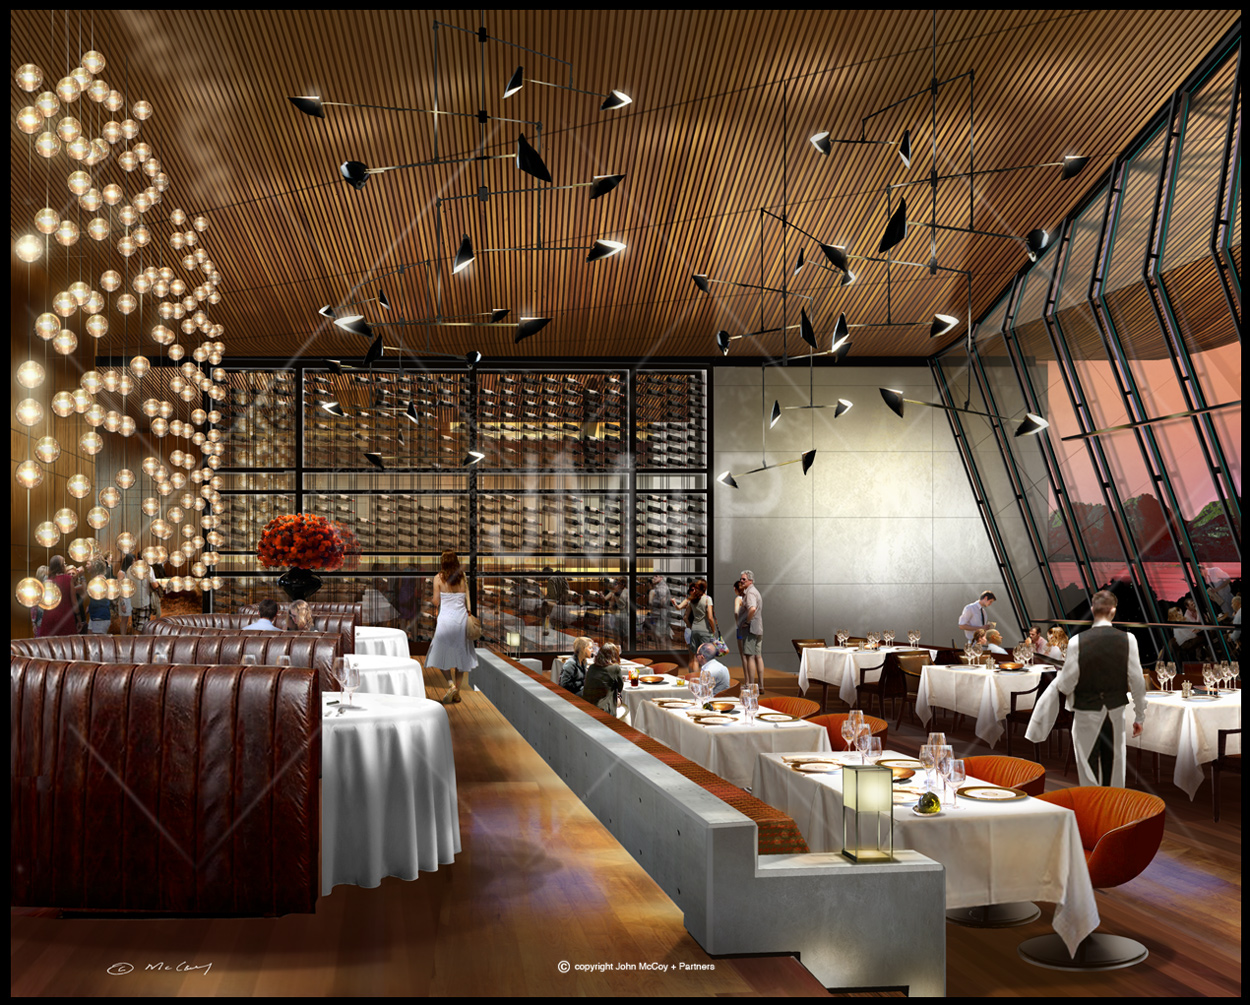 artist impression, interior view of bar and people seated.